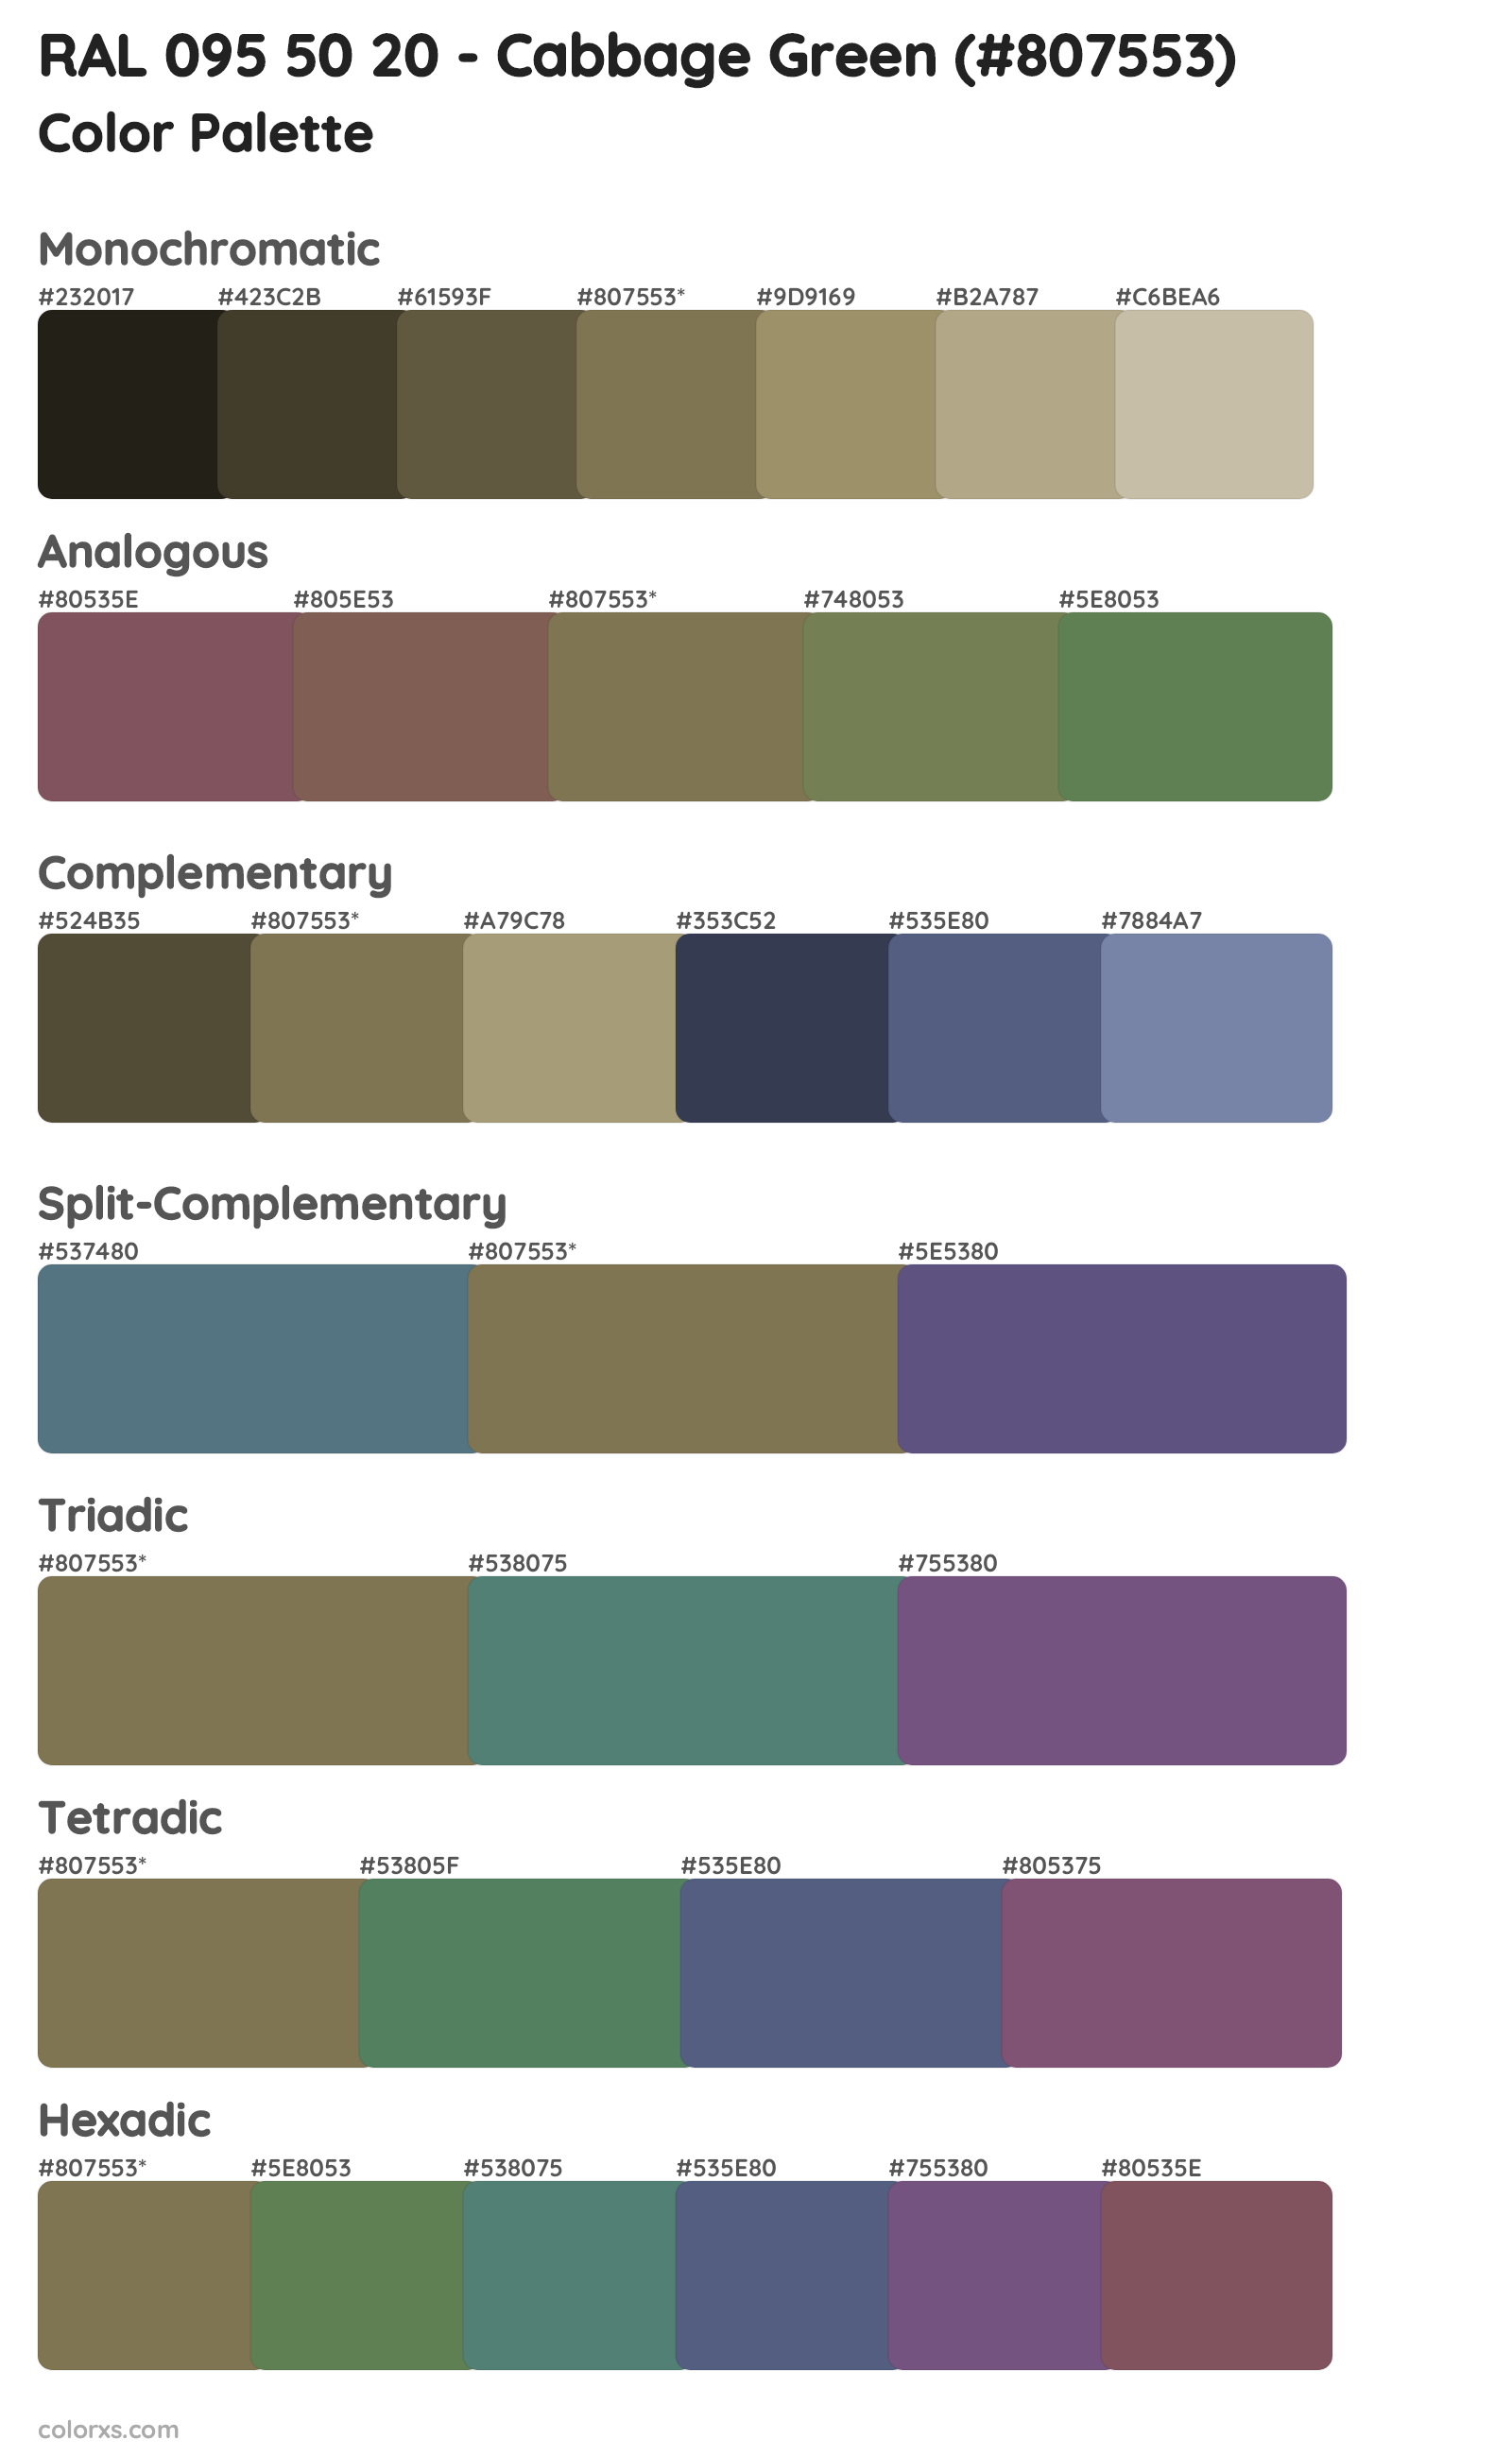 RAL 095 50 20 - Cabbage Green Color Scheme Palettes